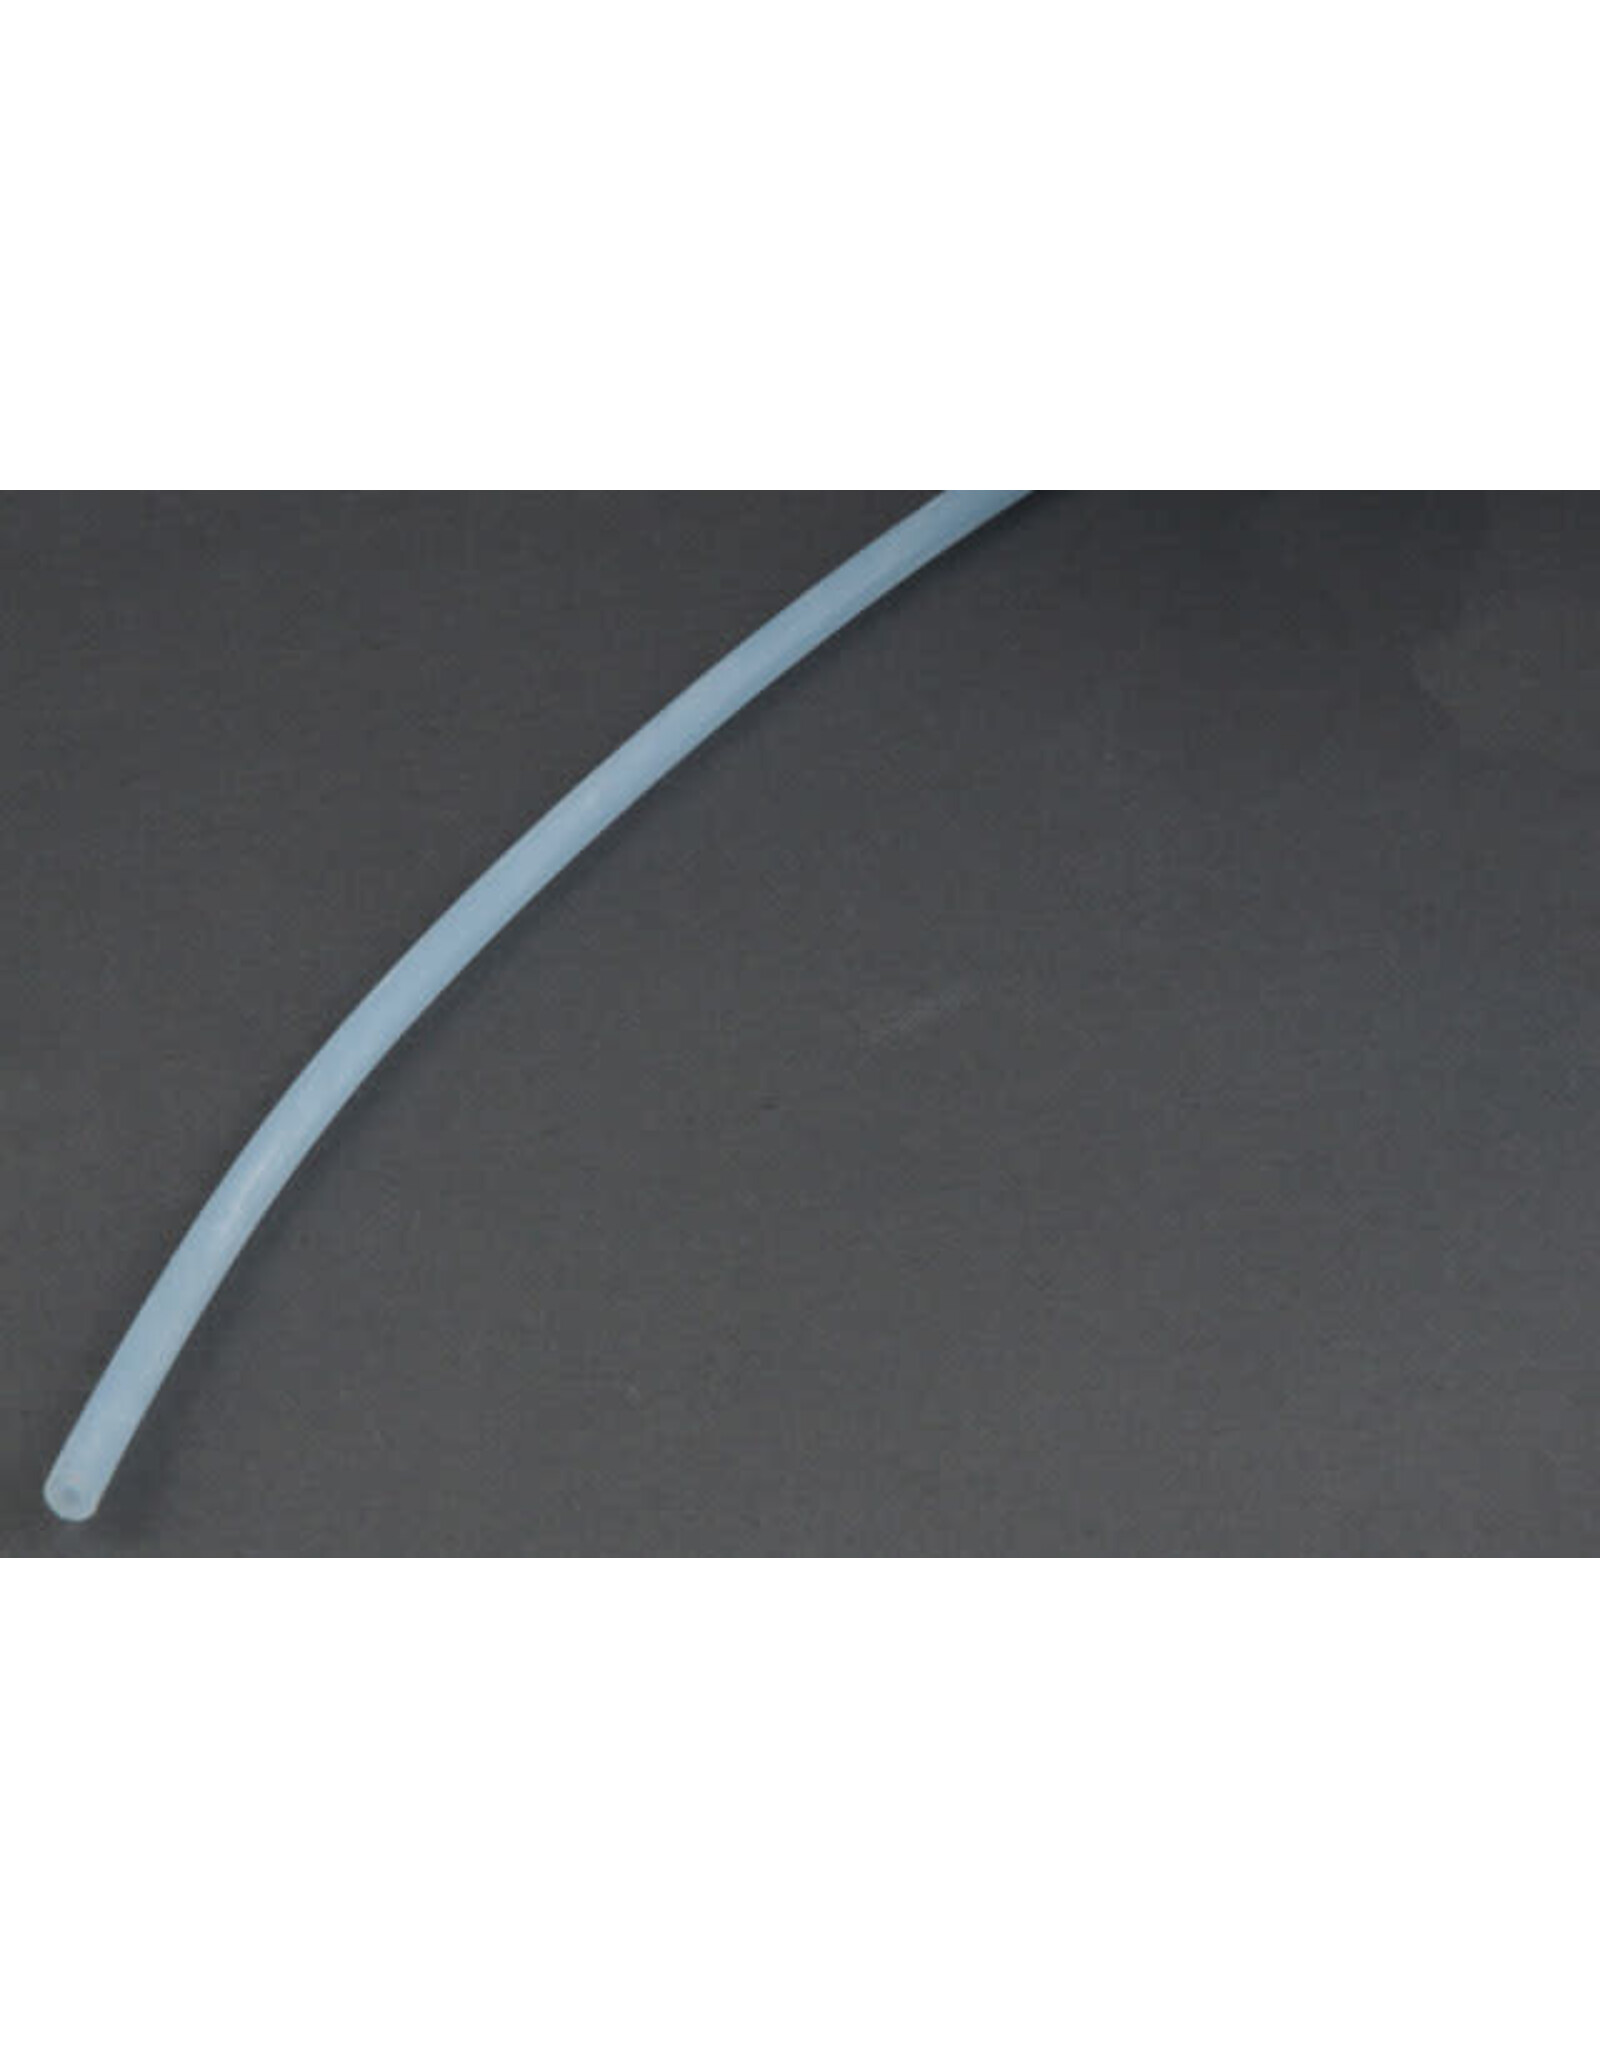 Dubro Silicone Fuel Tubing, Large 1'